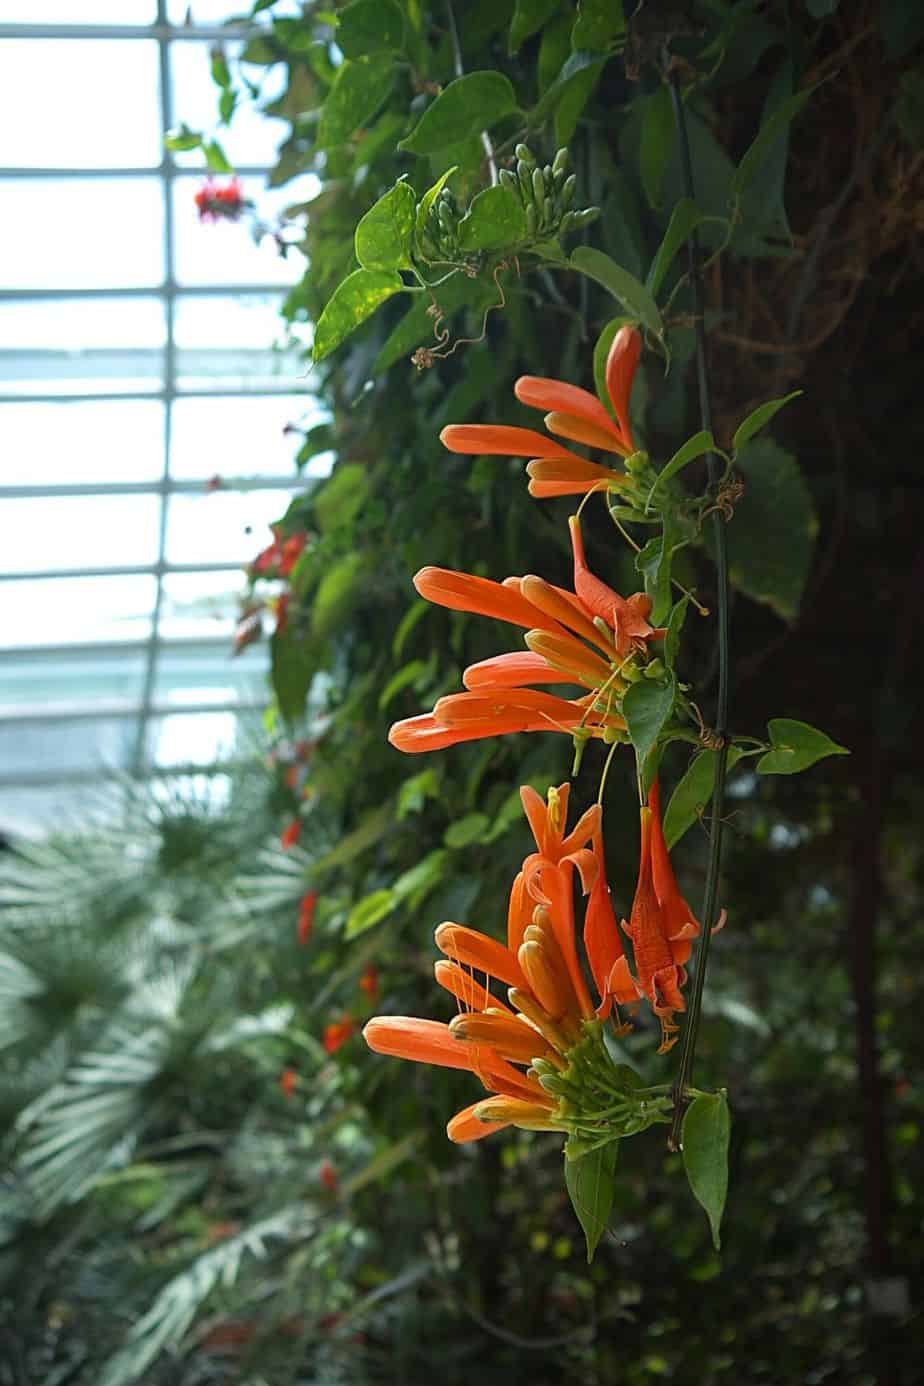 Coral honeysuckle's brightly-colored trumpet-shaped blooms looks great when grown on the west-facing side of the house